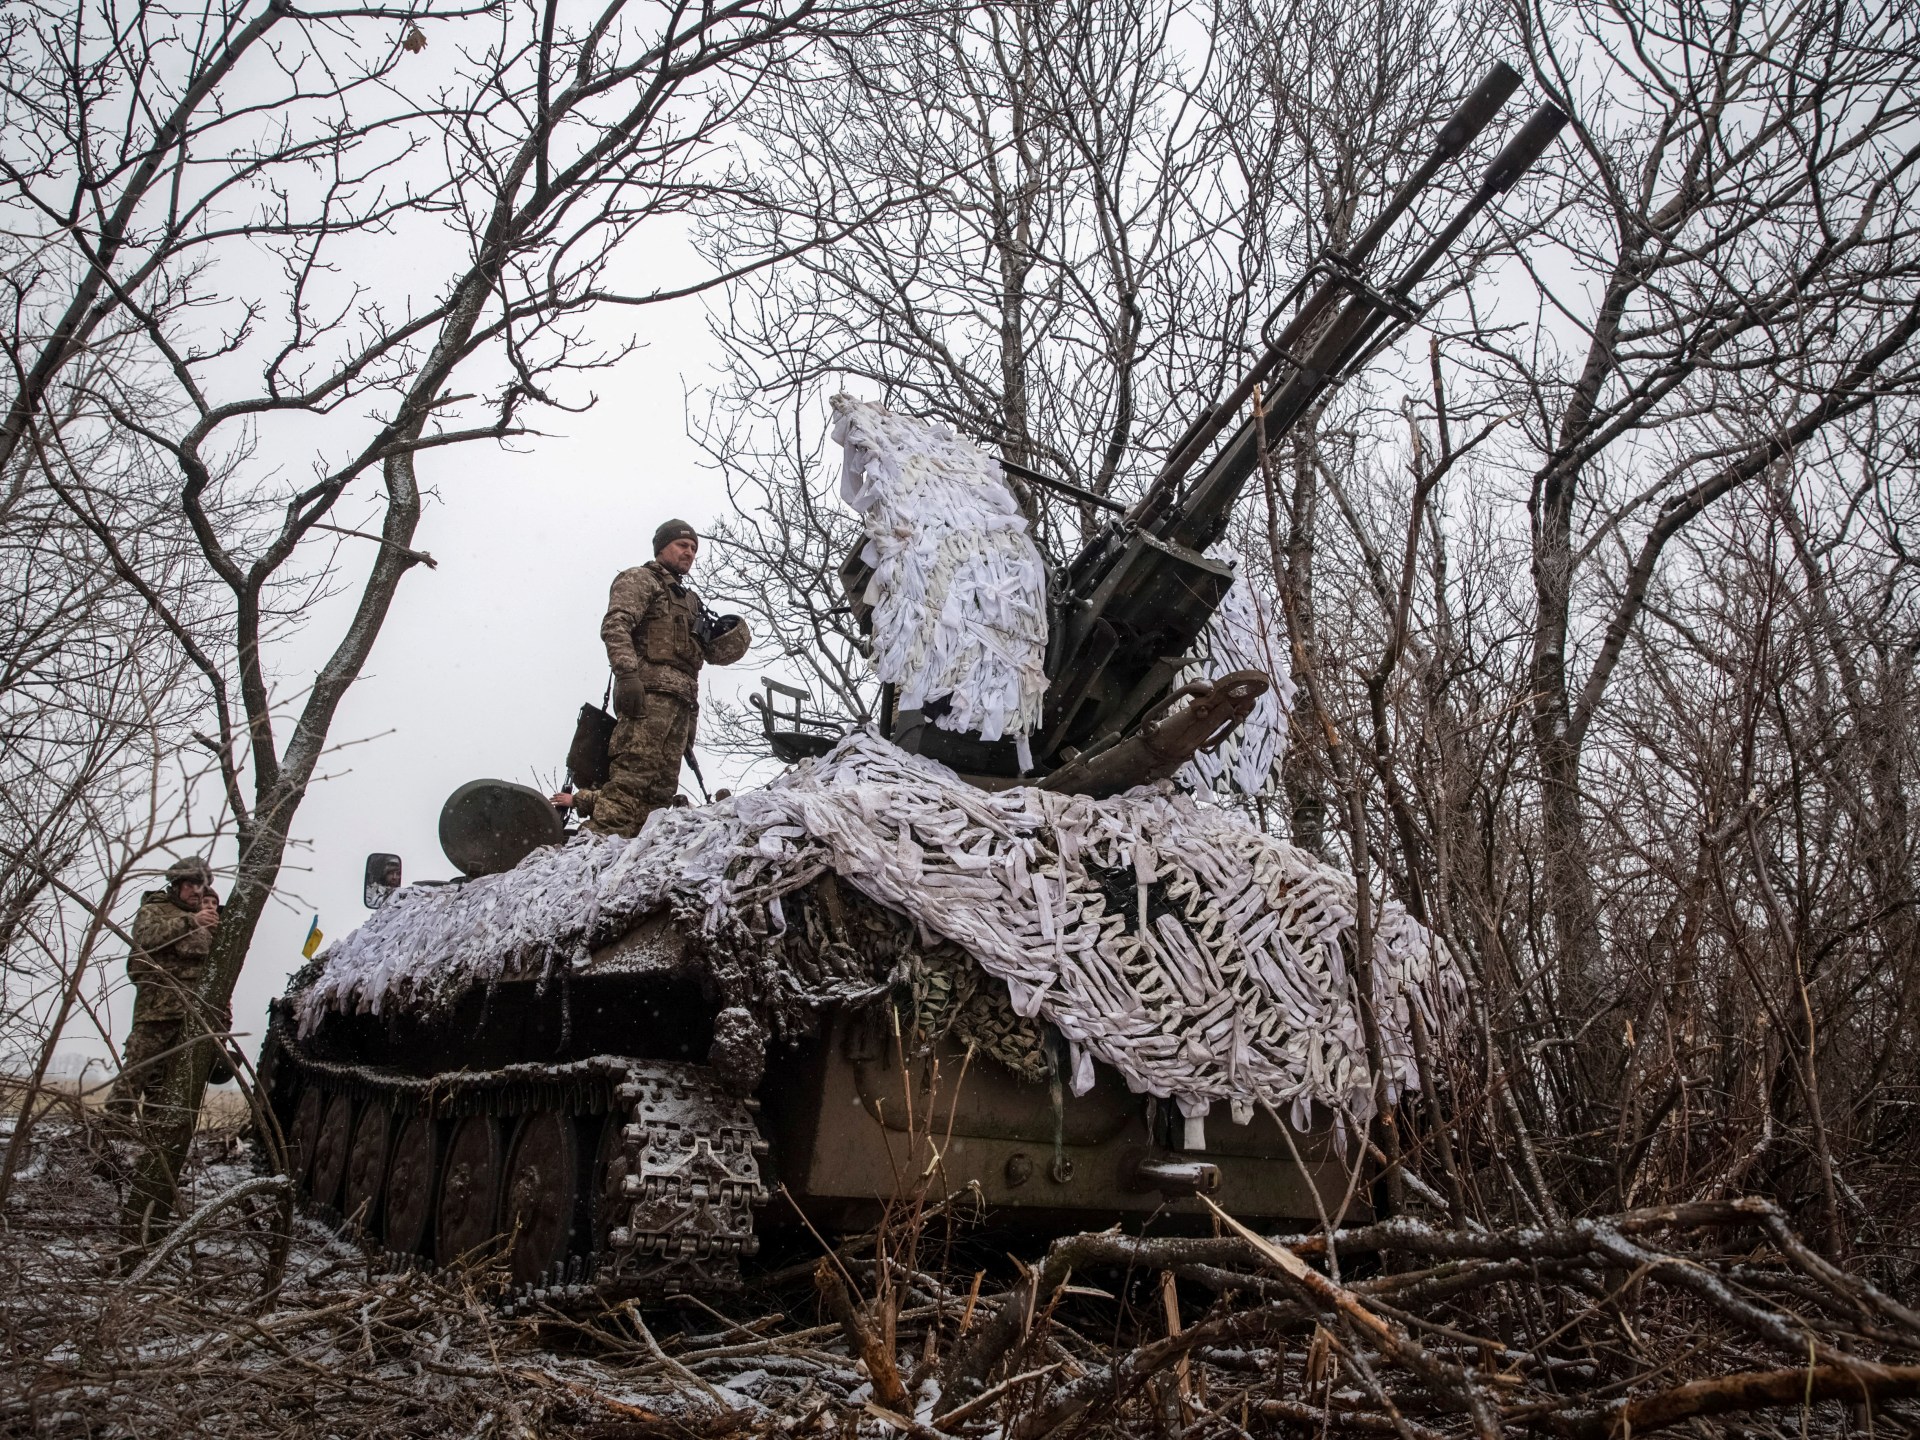 Western weapon deliveries in a race against Russia offensive | Russia-Ukraine war News